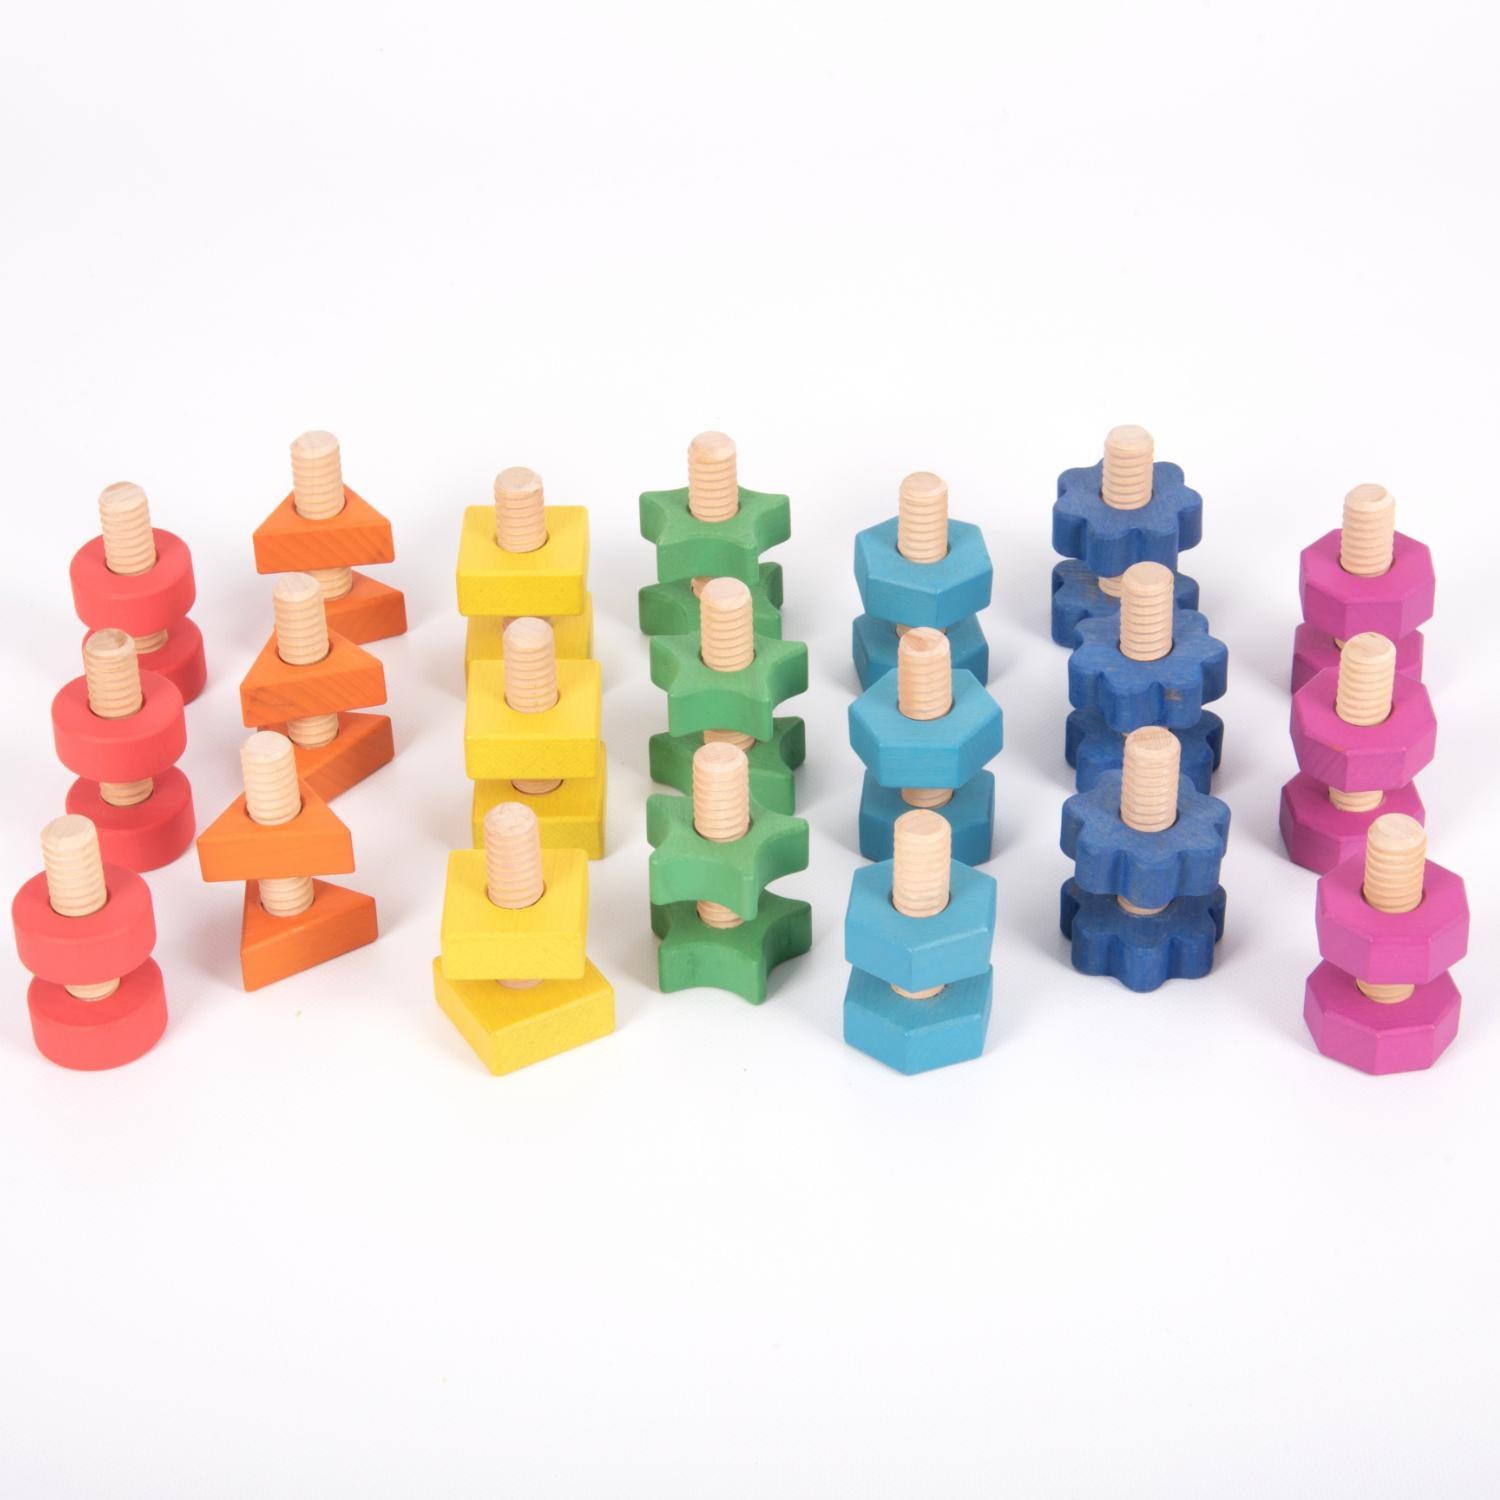 TickiT Rainbow Wooden Nuts & Bolts | Wooden Loose Parts | Open-Ended Toys | Front View – All Nuts & Bolts Assembled | BeoVERDE.ie